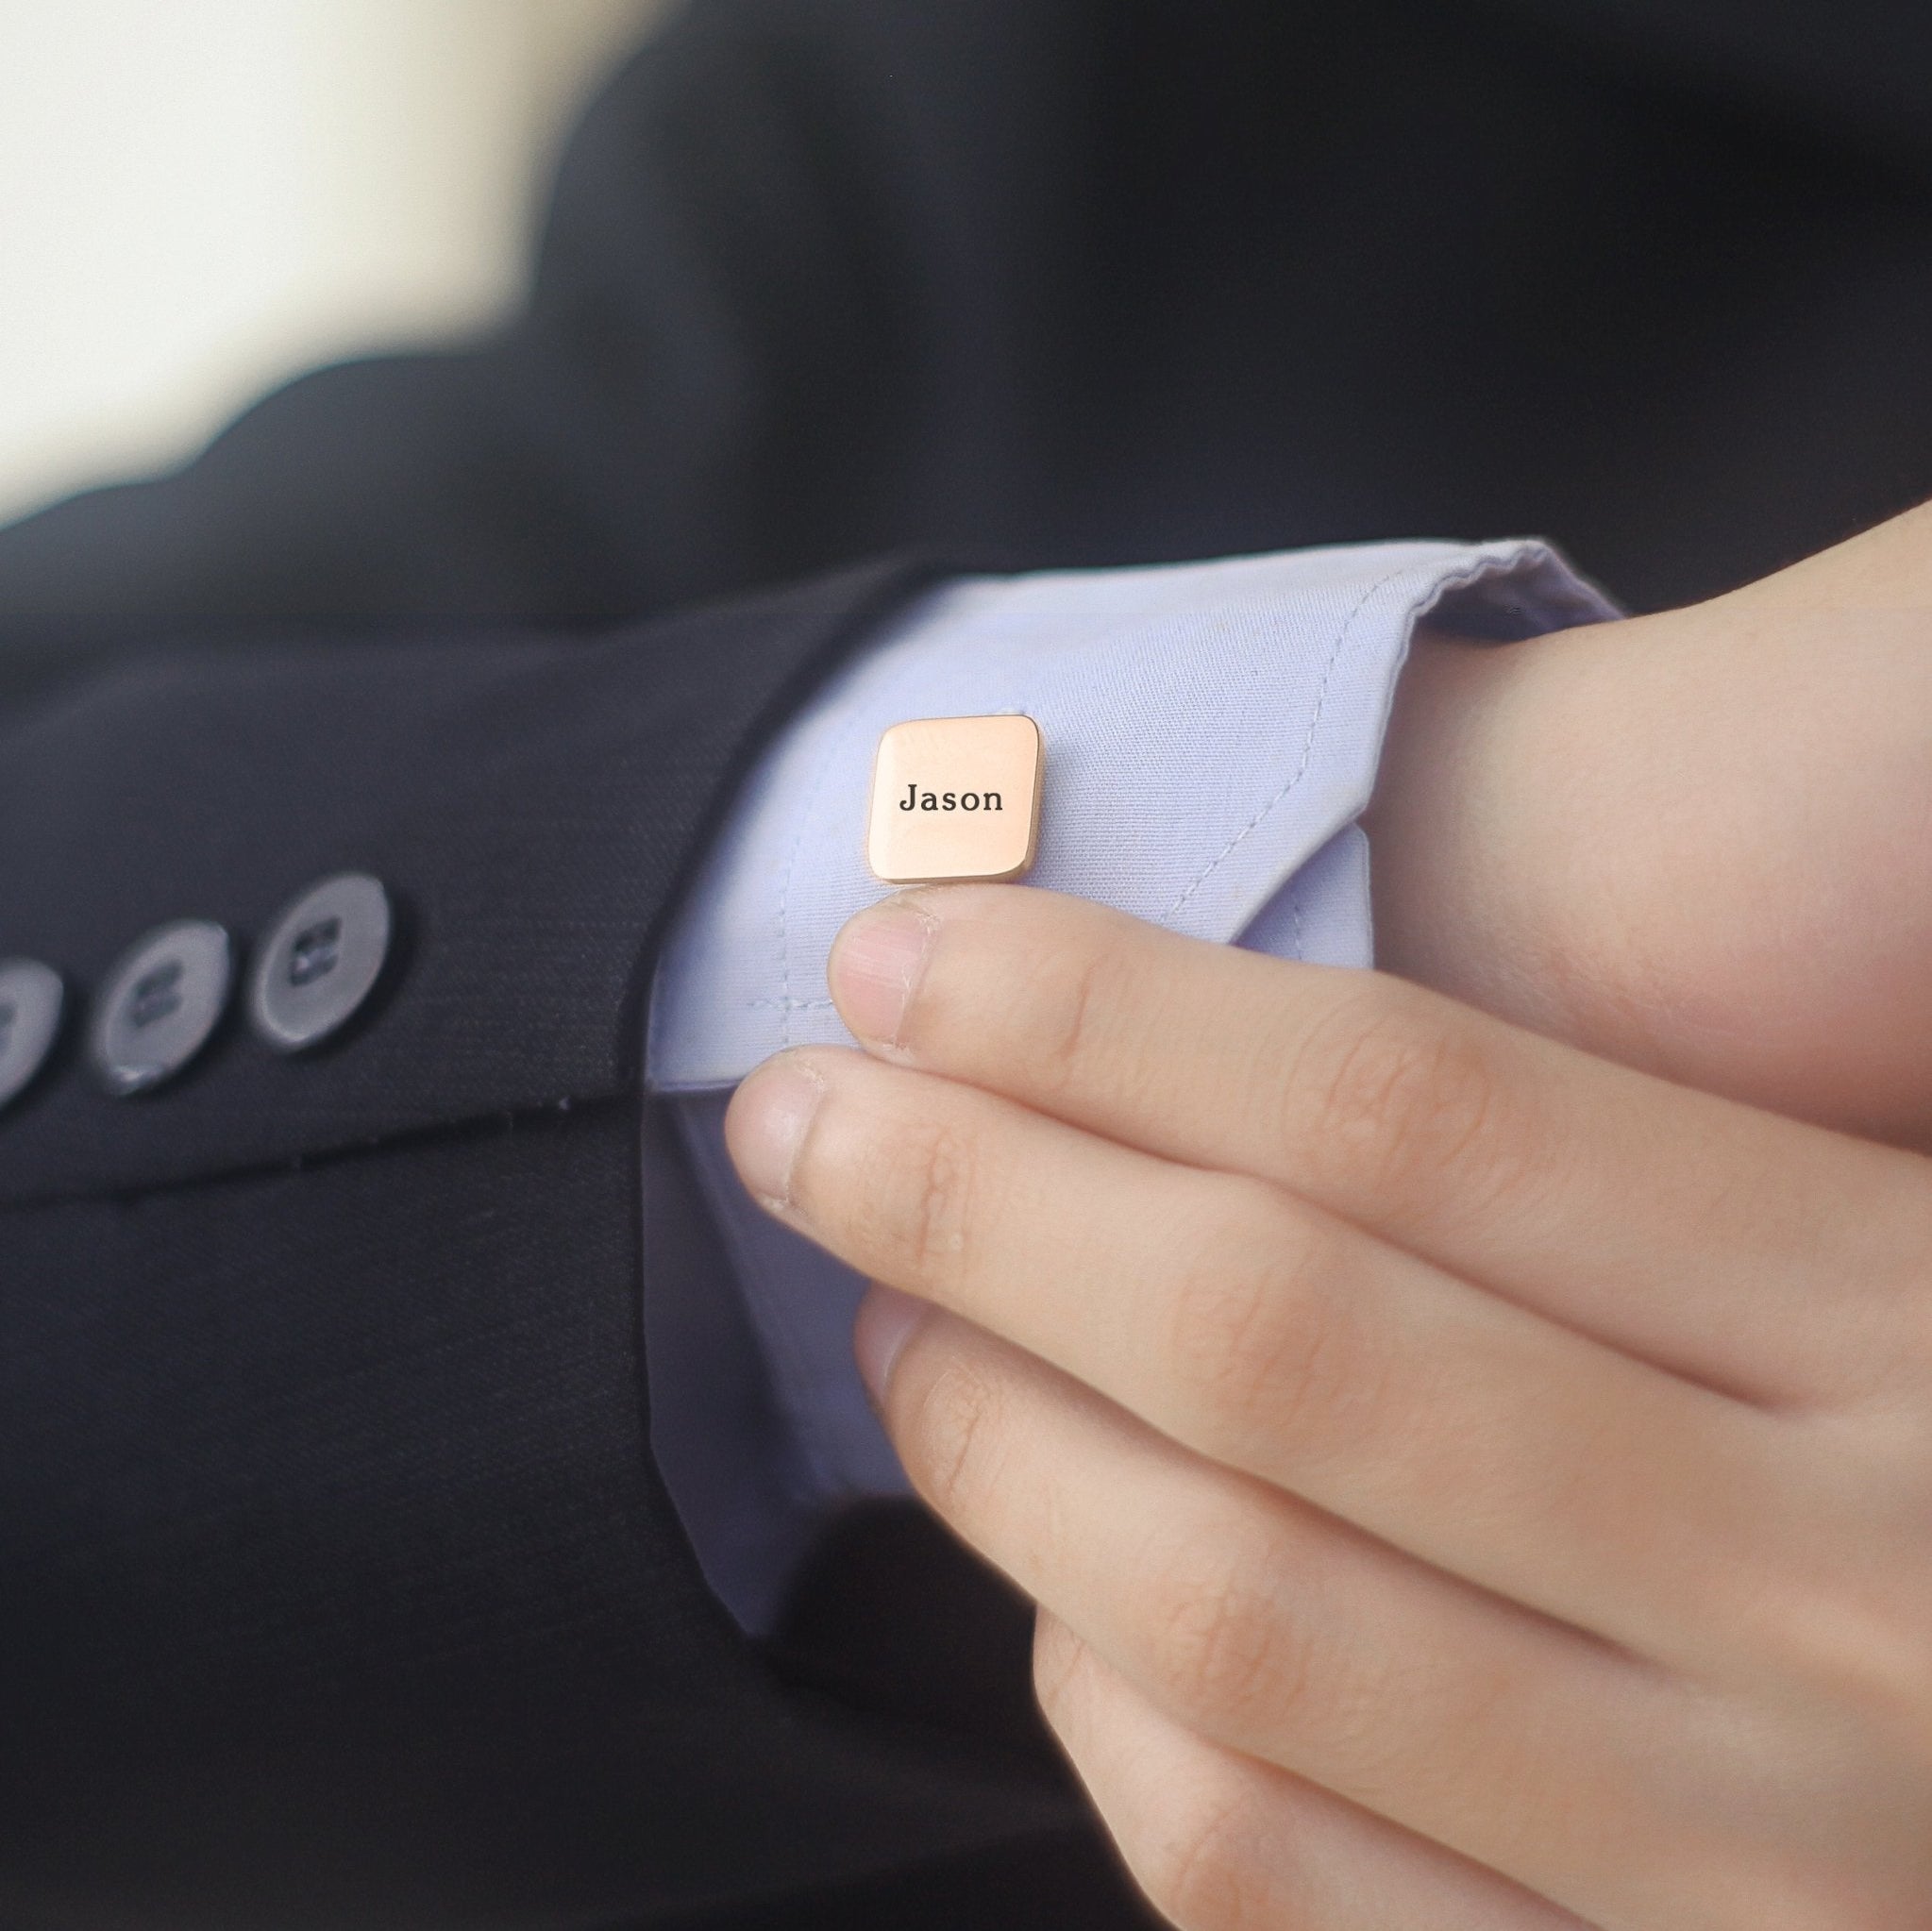 Personalised Square Cufflinks - Mens Jewellery by Belle Fever